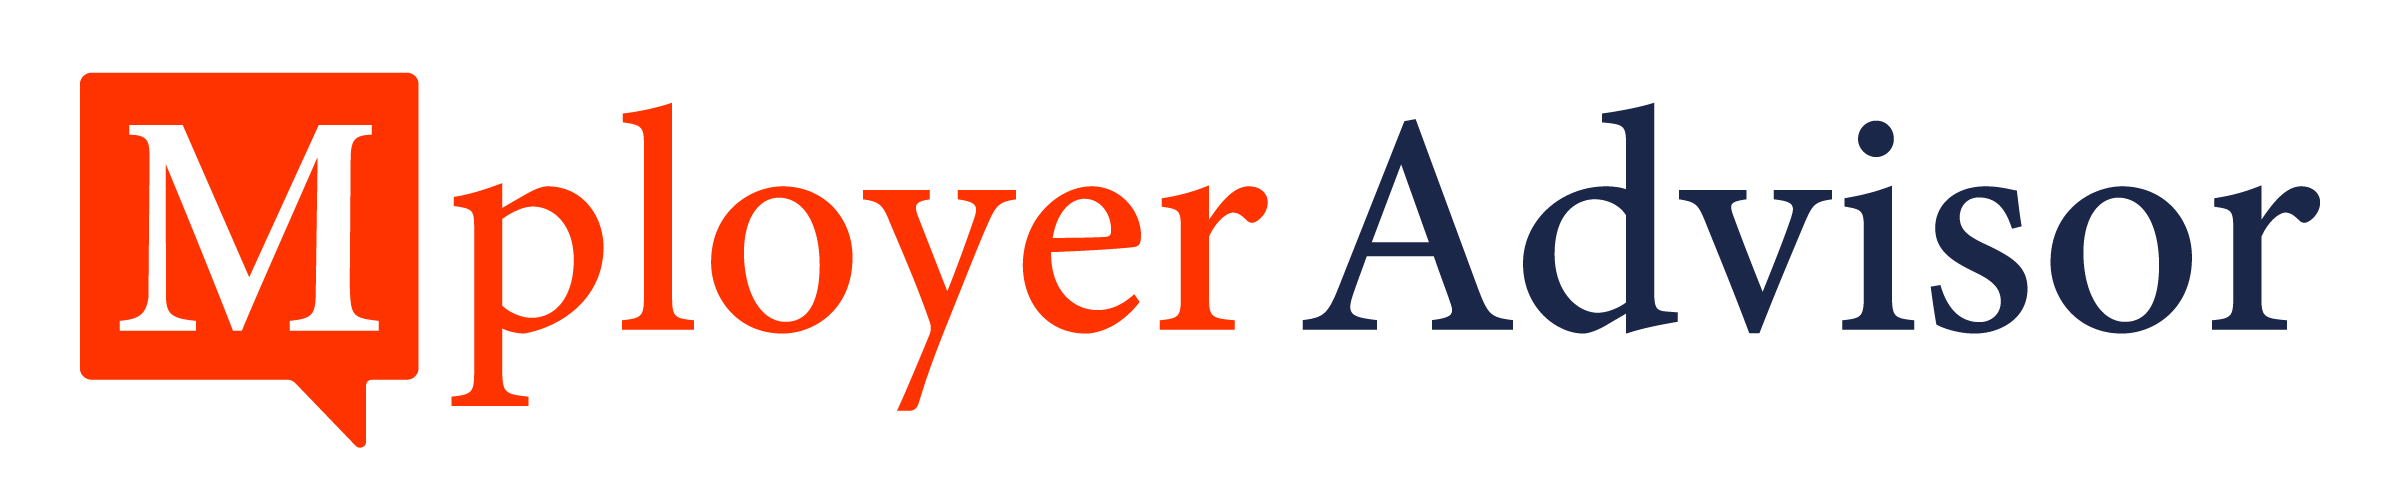 Mployer Advisor is changing the way employers search, evaluate, and select insurance advisors.